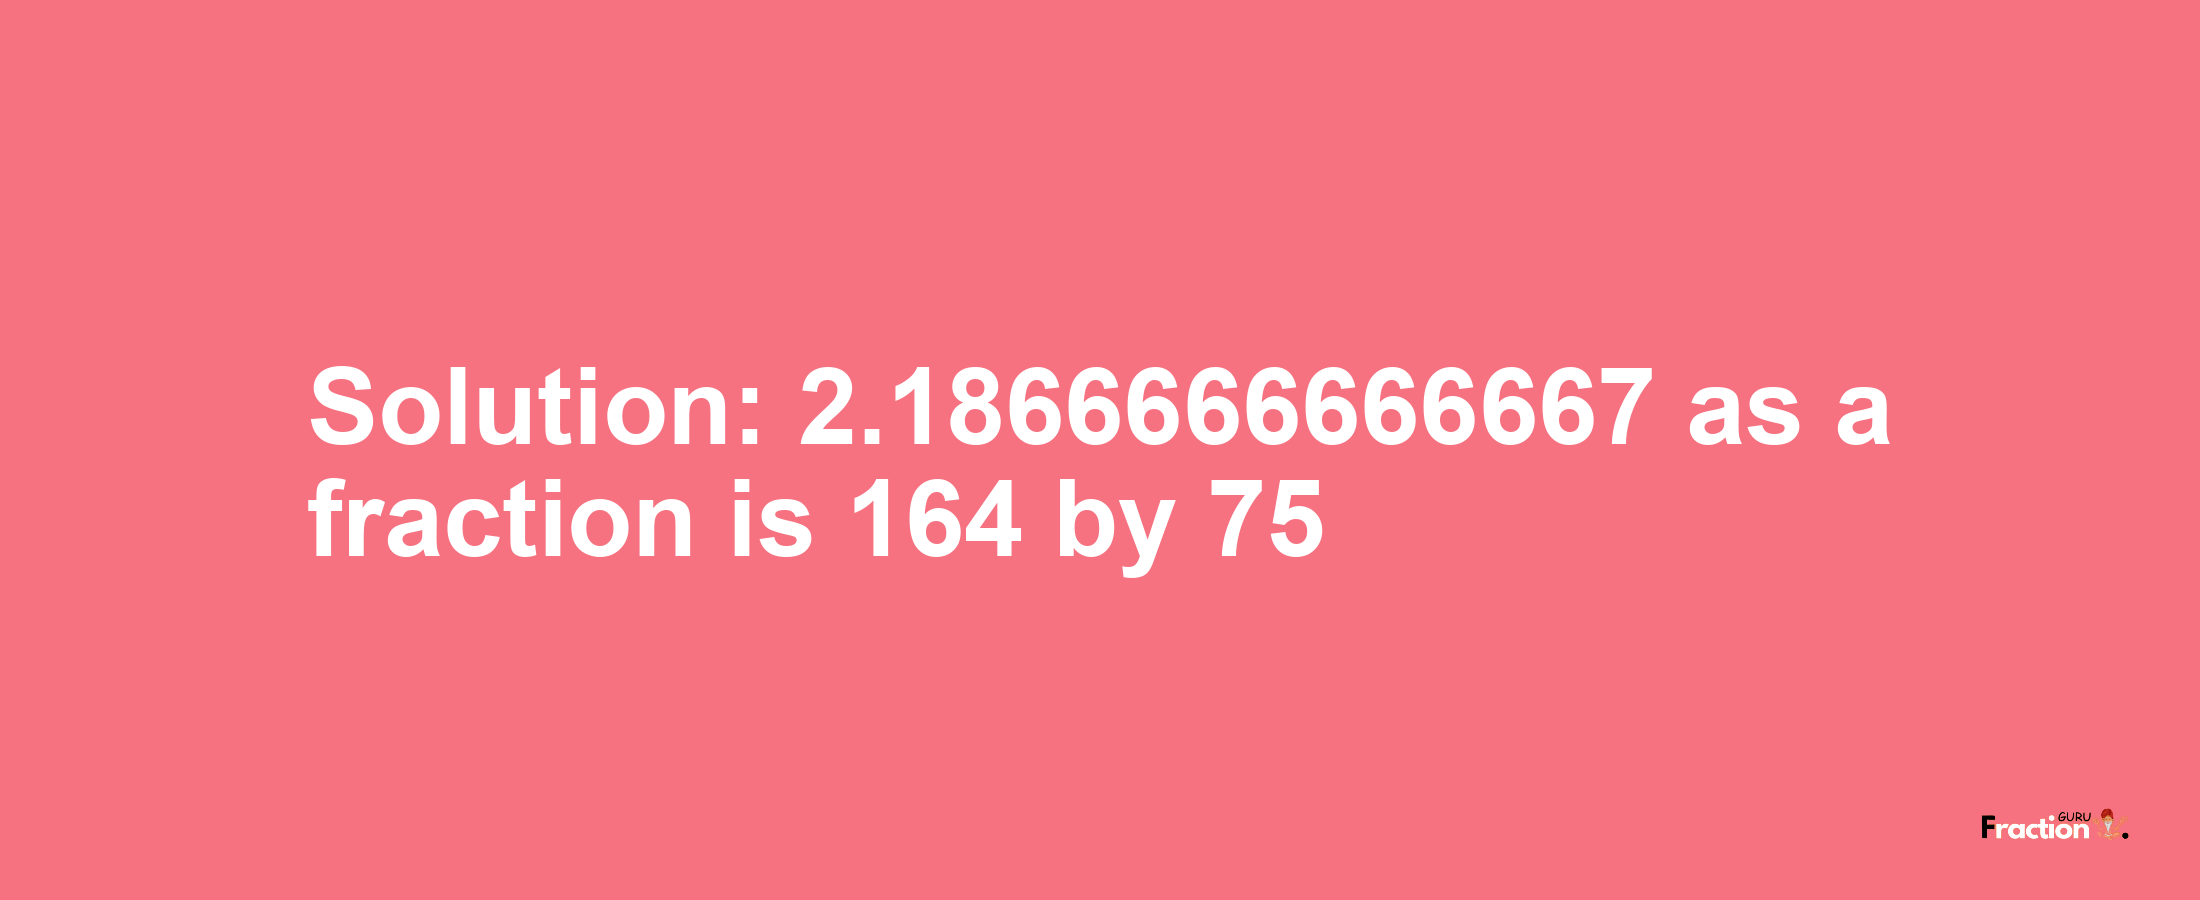 Solution:2.1866666666667 as a fraction is 164/75